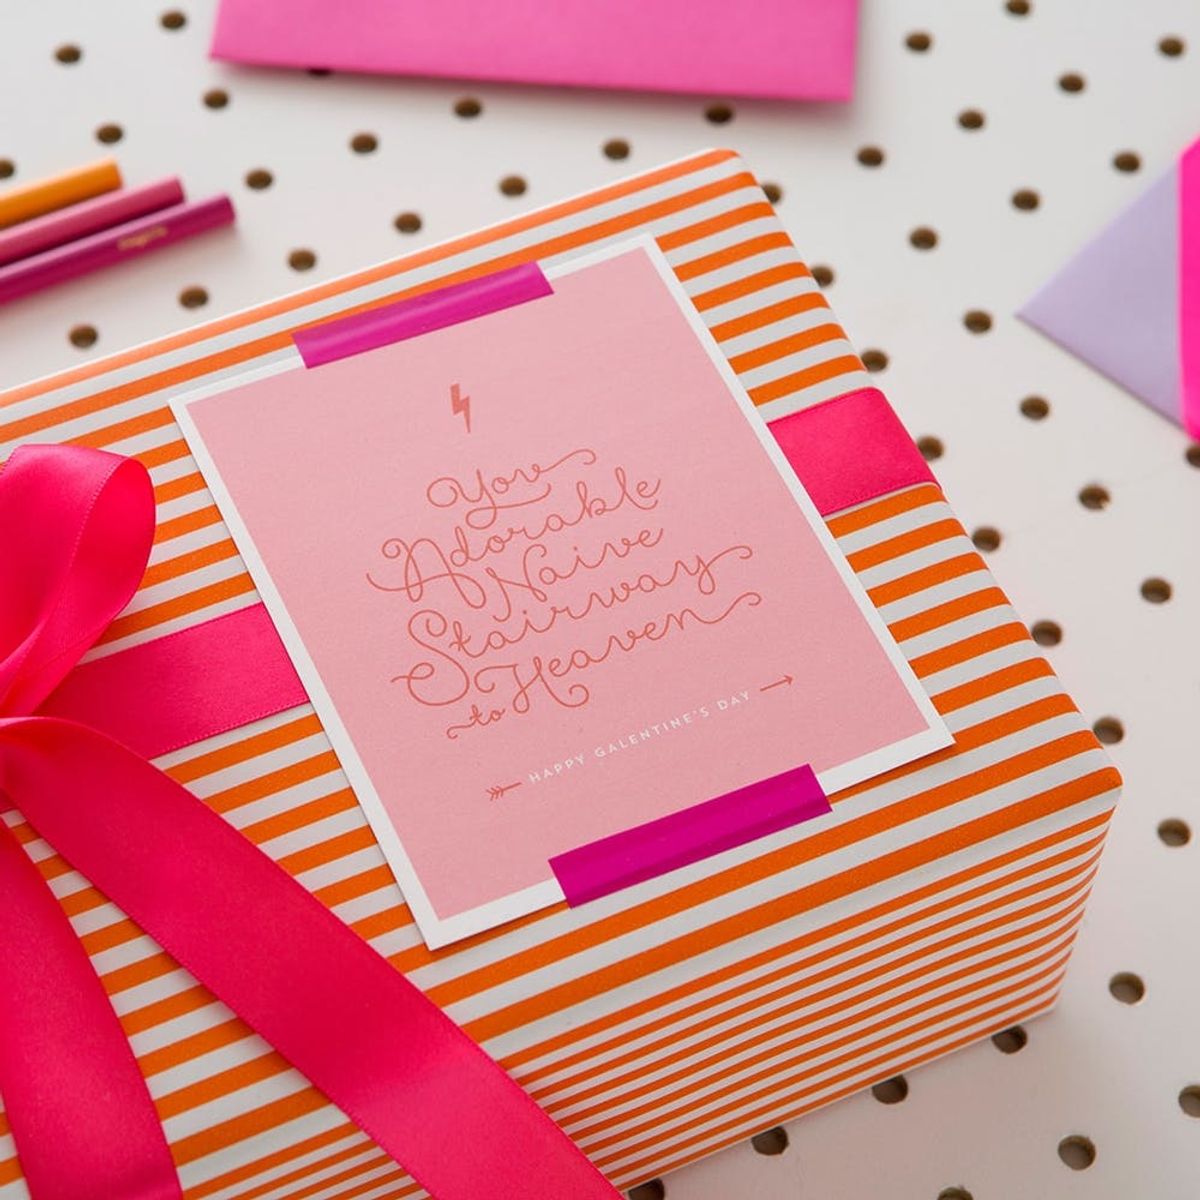 Galentine’s Day Printables for the Ann Perkins/Leslie Knope in Your Life